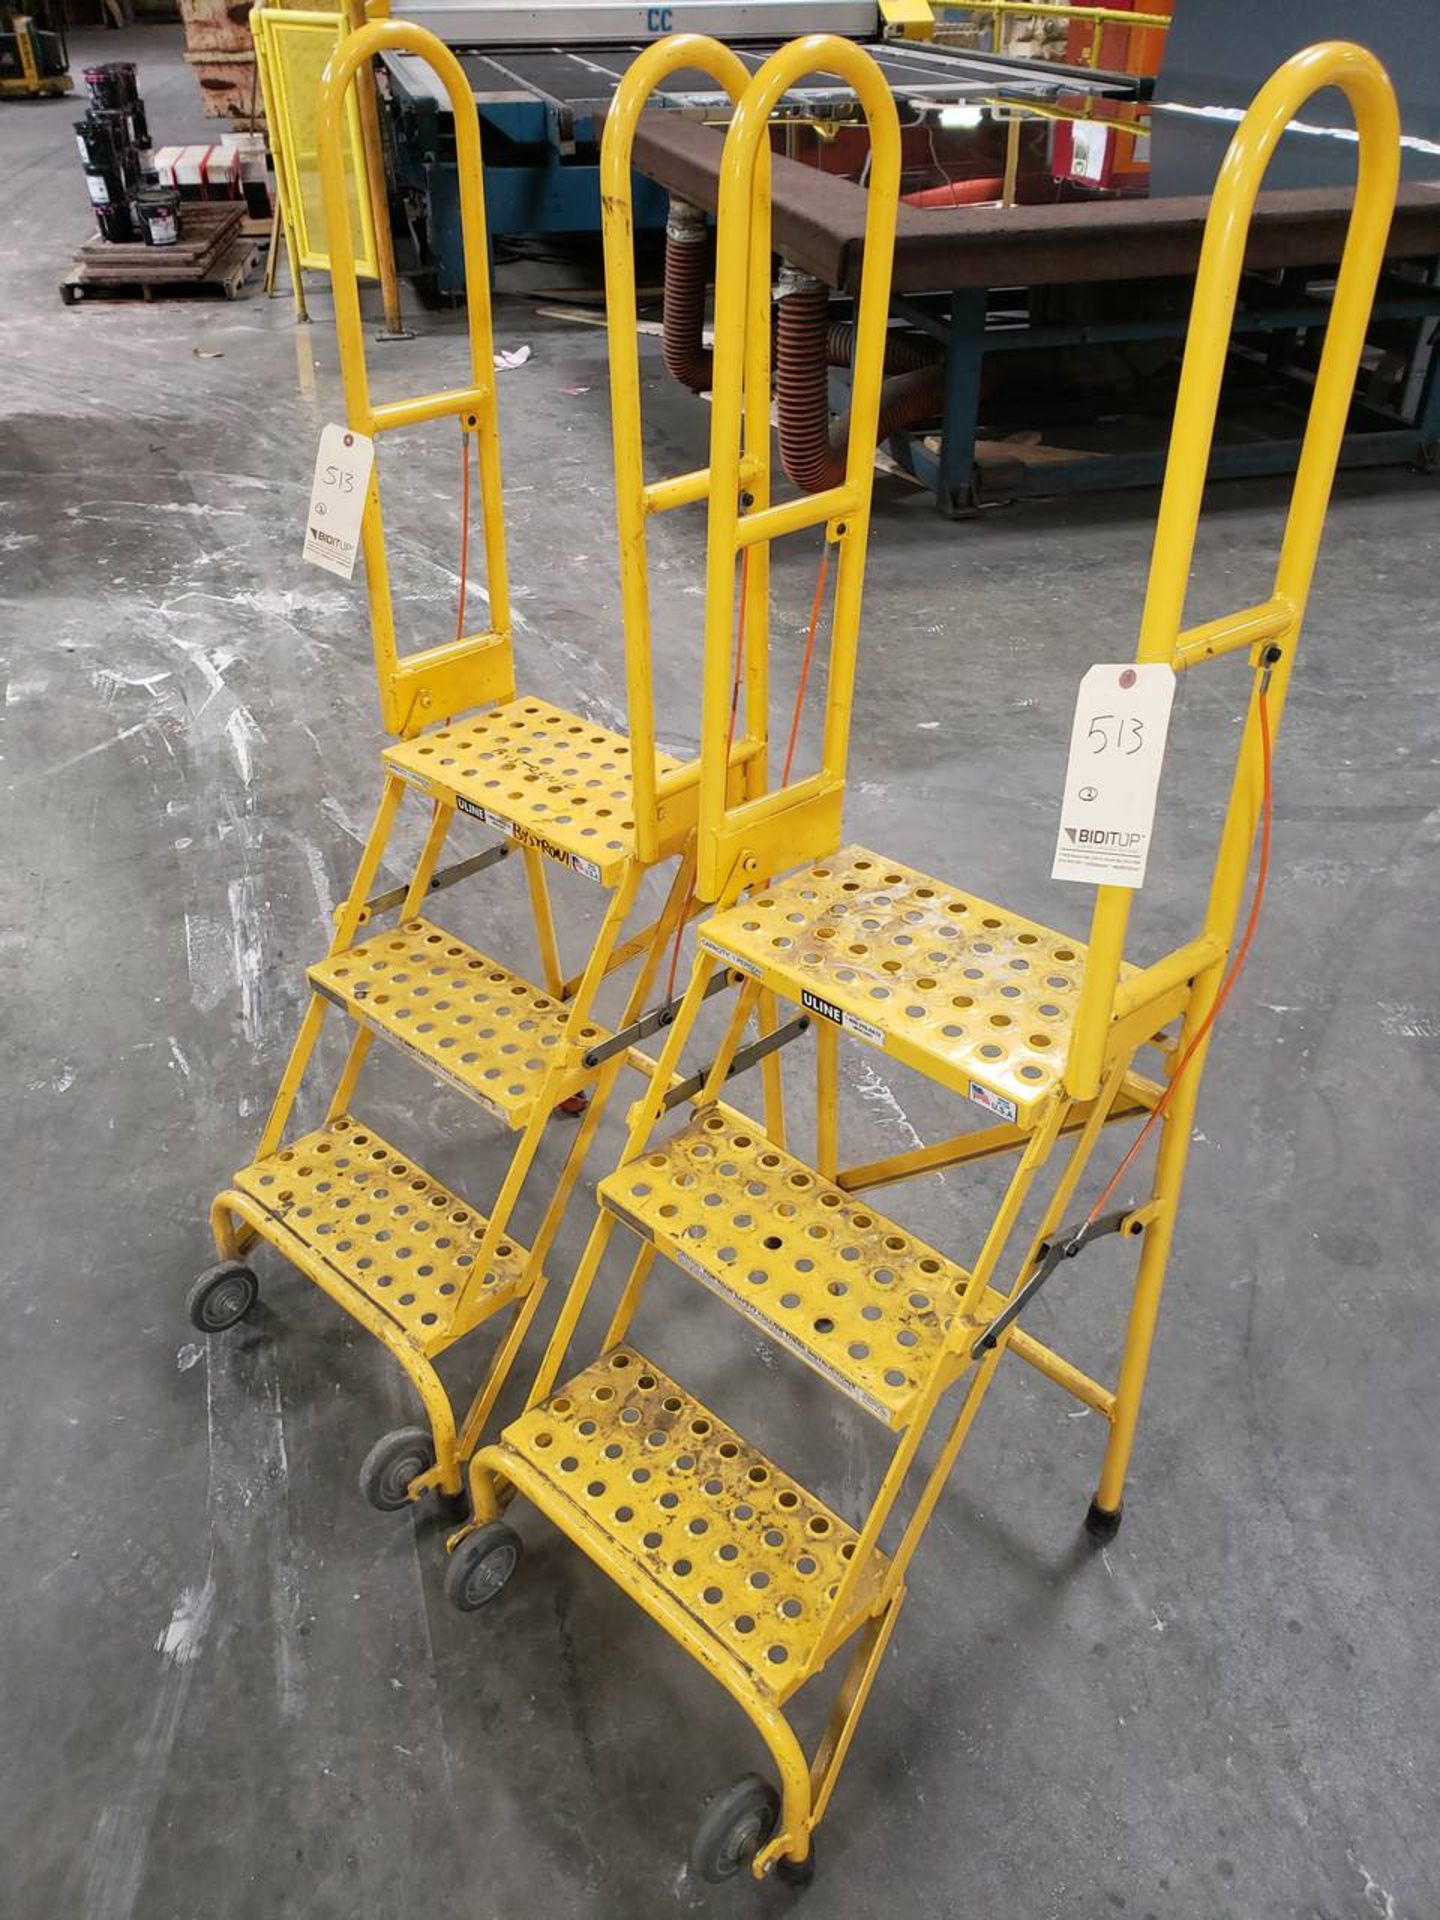 ULINE 59"" Collapsable/Rolling Stairs